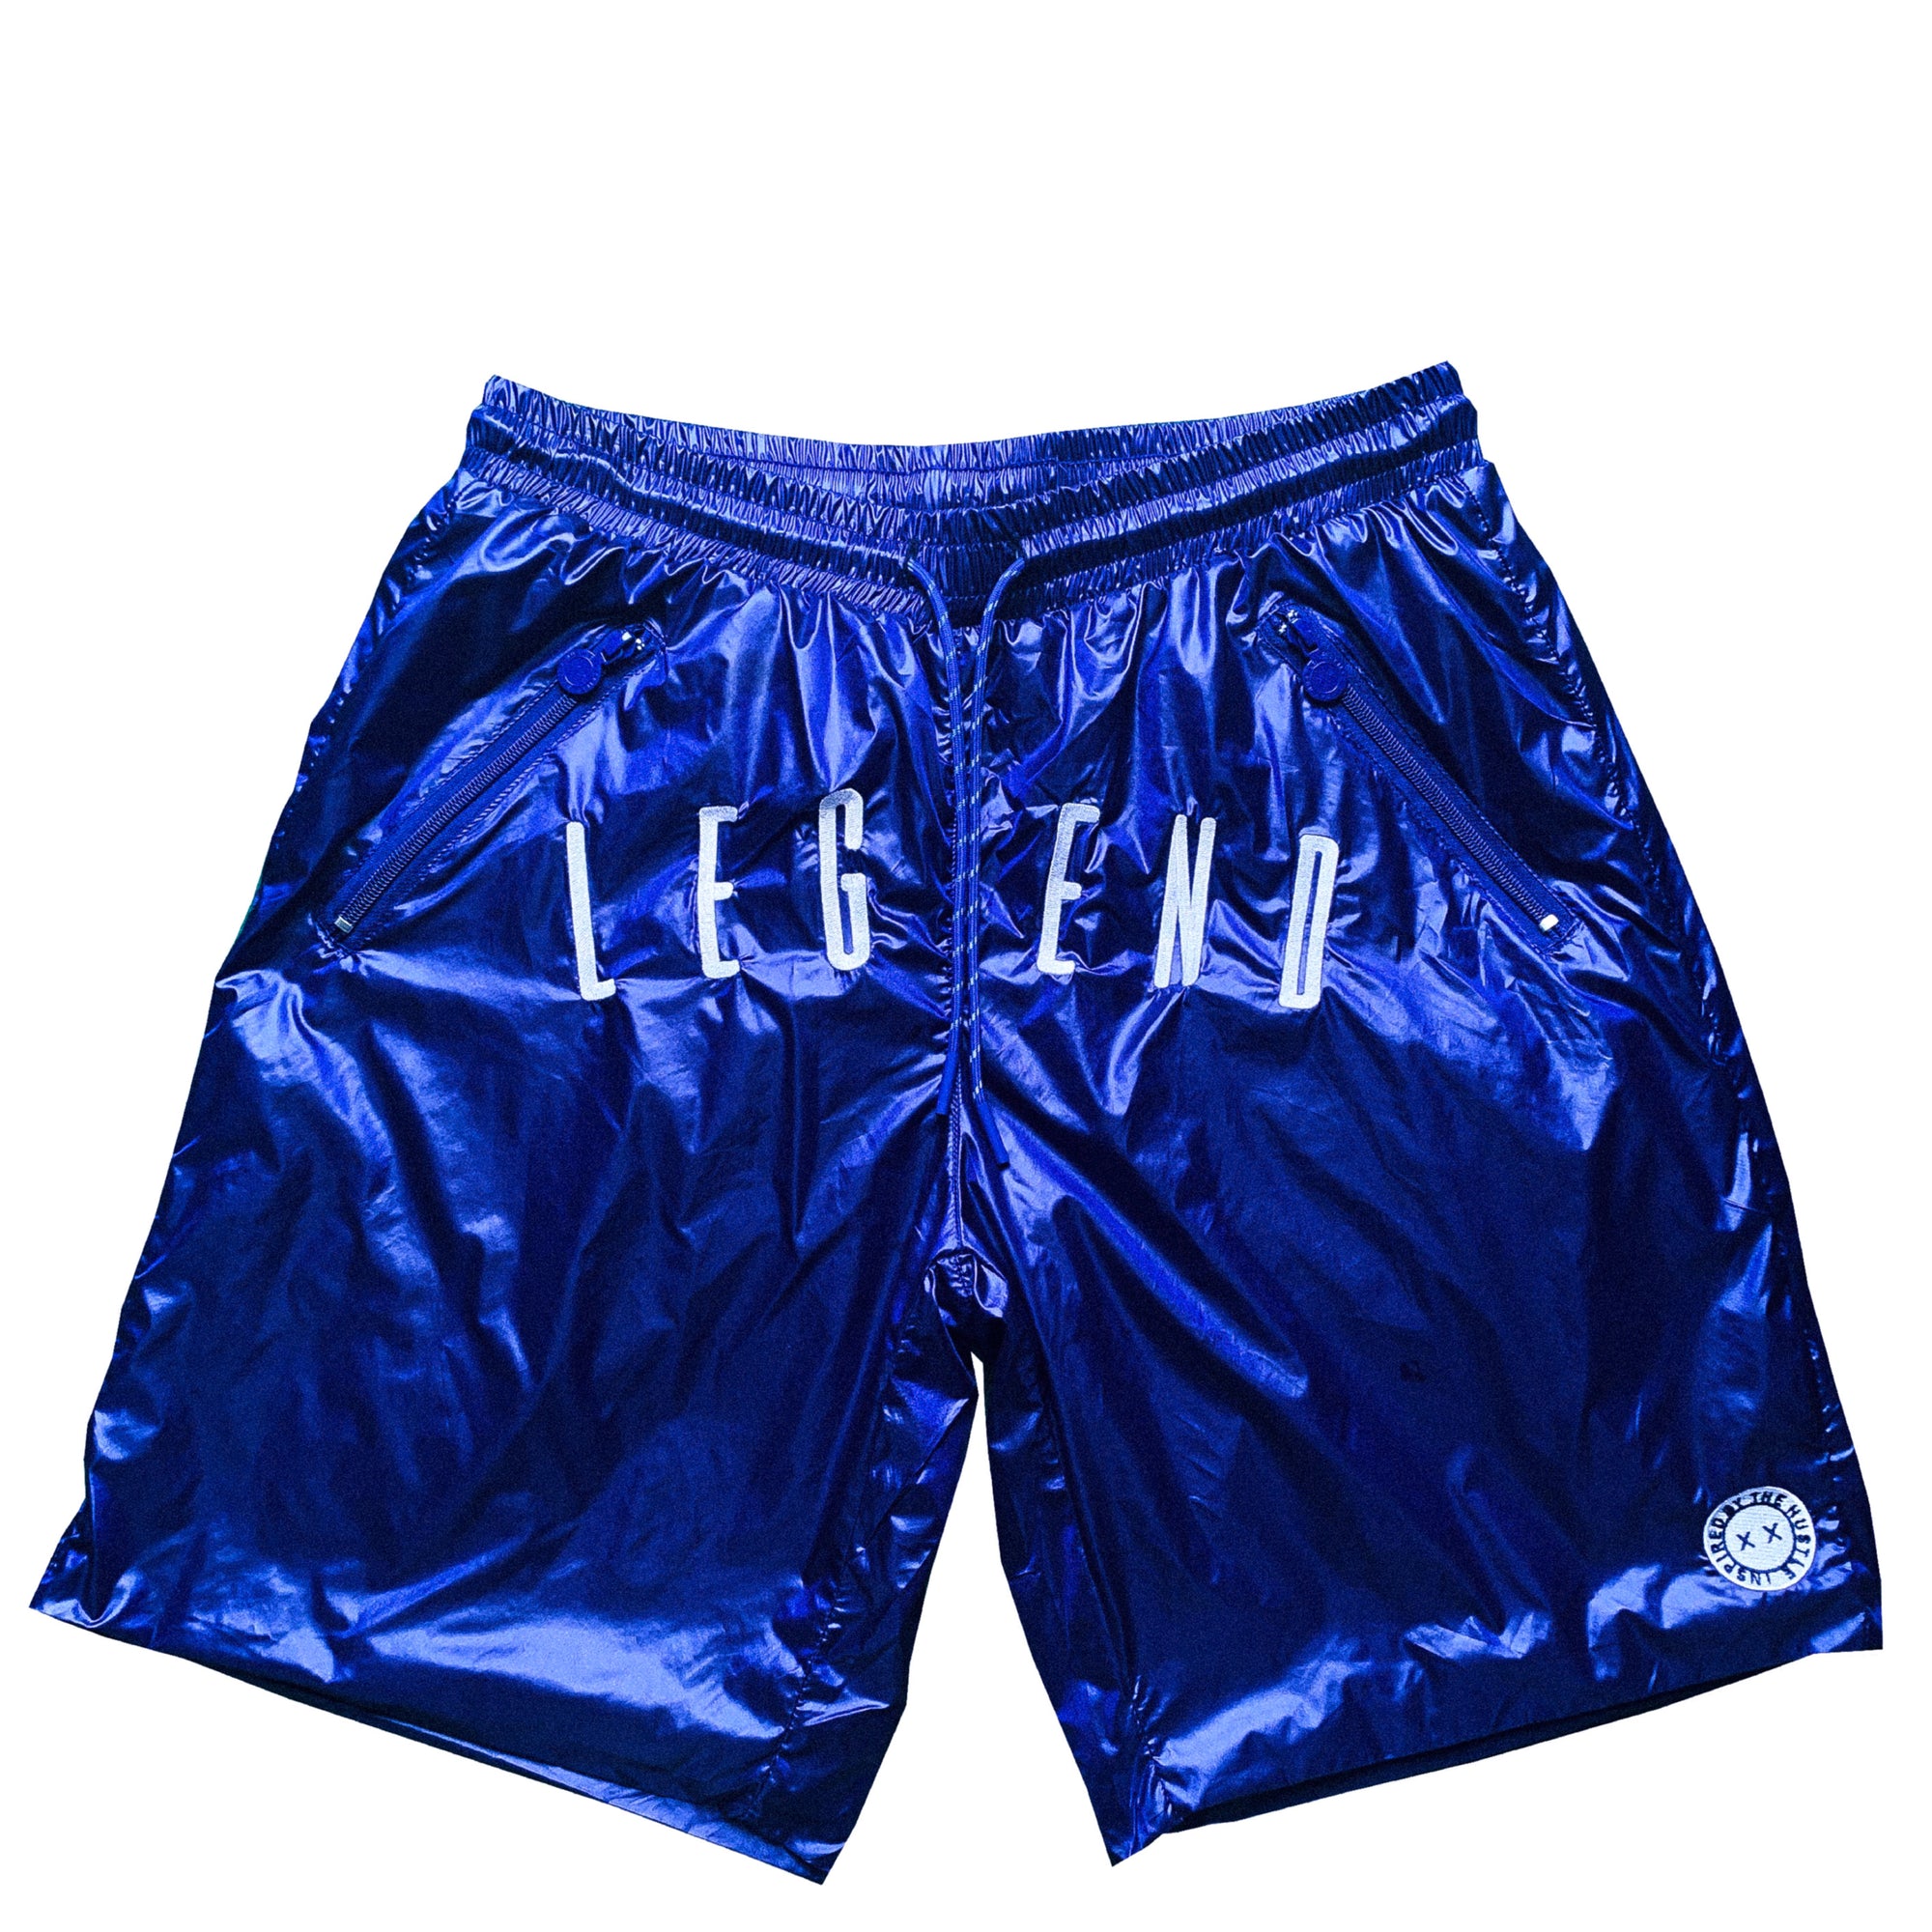 Legend Embroidery Shorts Blue/White